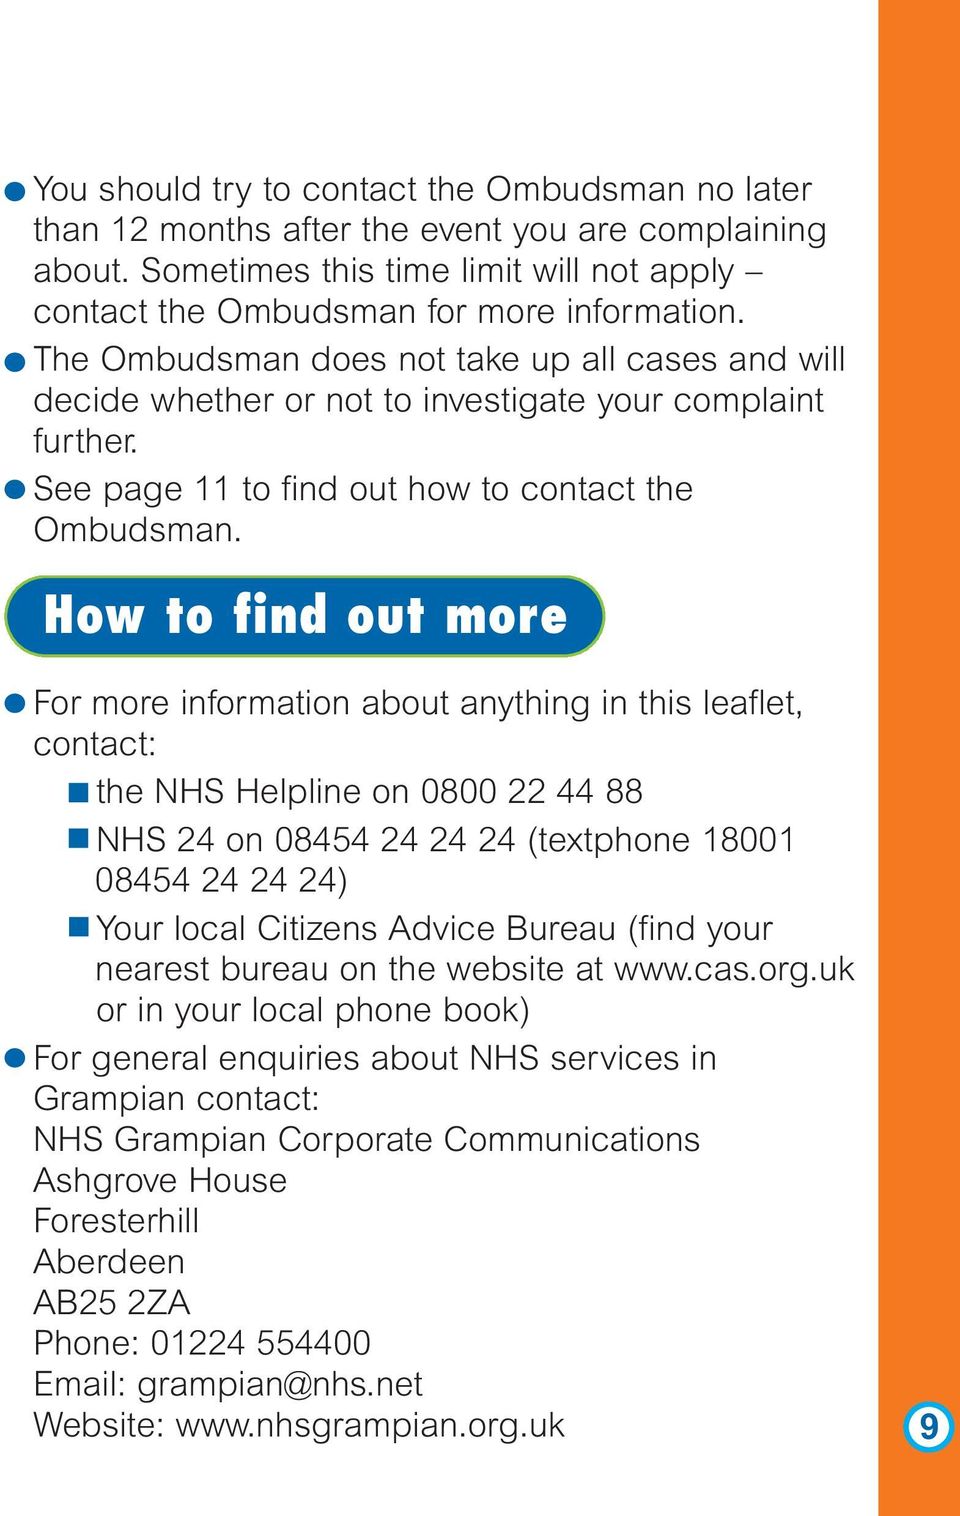 How to find out more For more information about anything in this leaflet, contact: the NHS Helpline on 0800 22 44 88 NHS 24 on 08454 24 24 24 (textphone 18001 08454 24 24 24) Your local Citizens